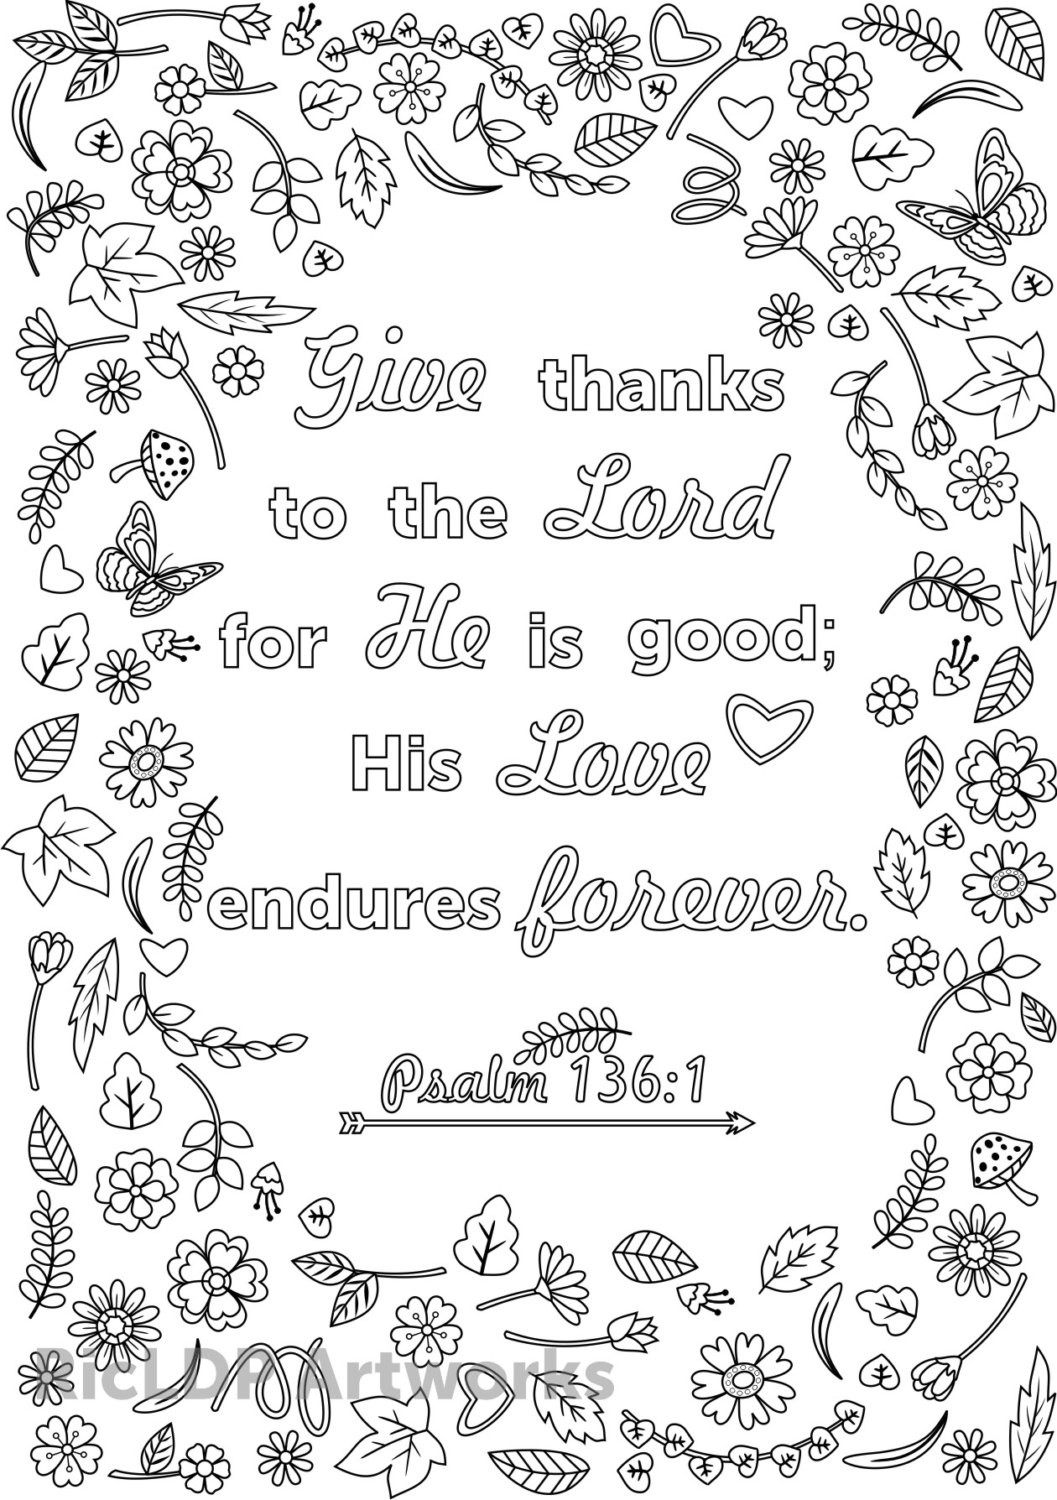 Bible Verses Coloring Pages For Adults
 Three Bible Verse Coloring Pages for Adults Printable